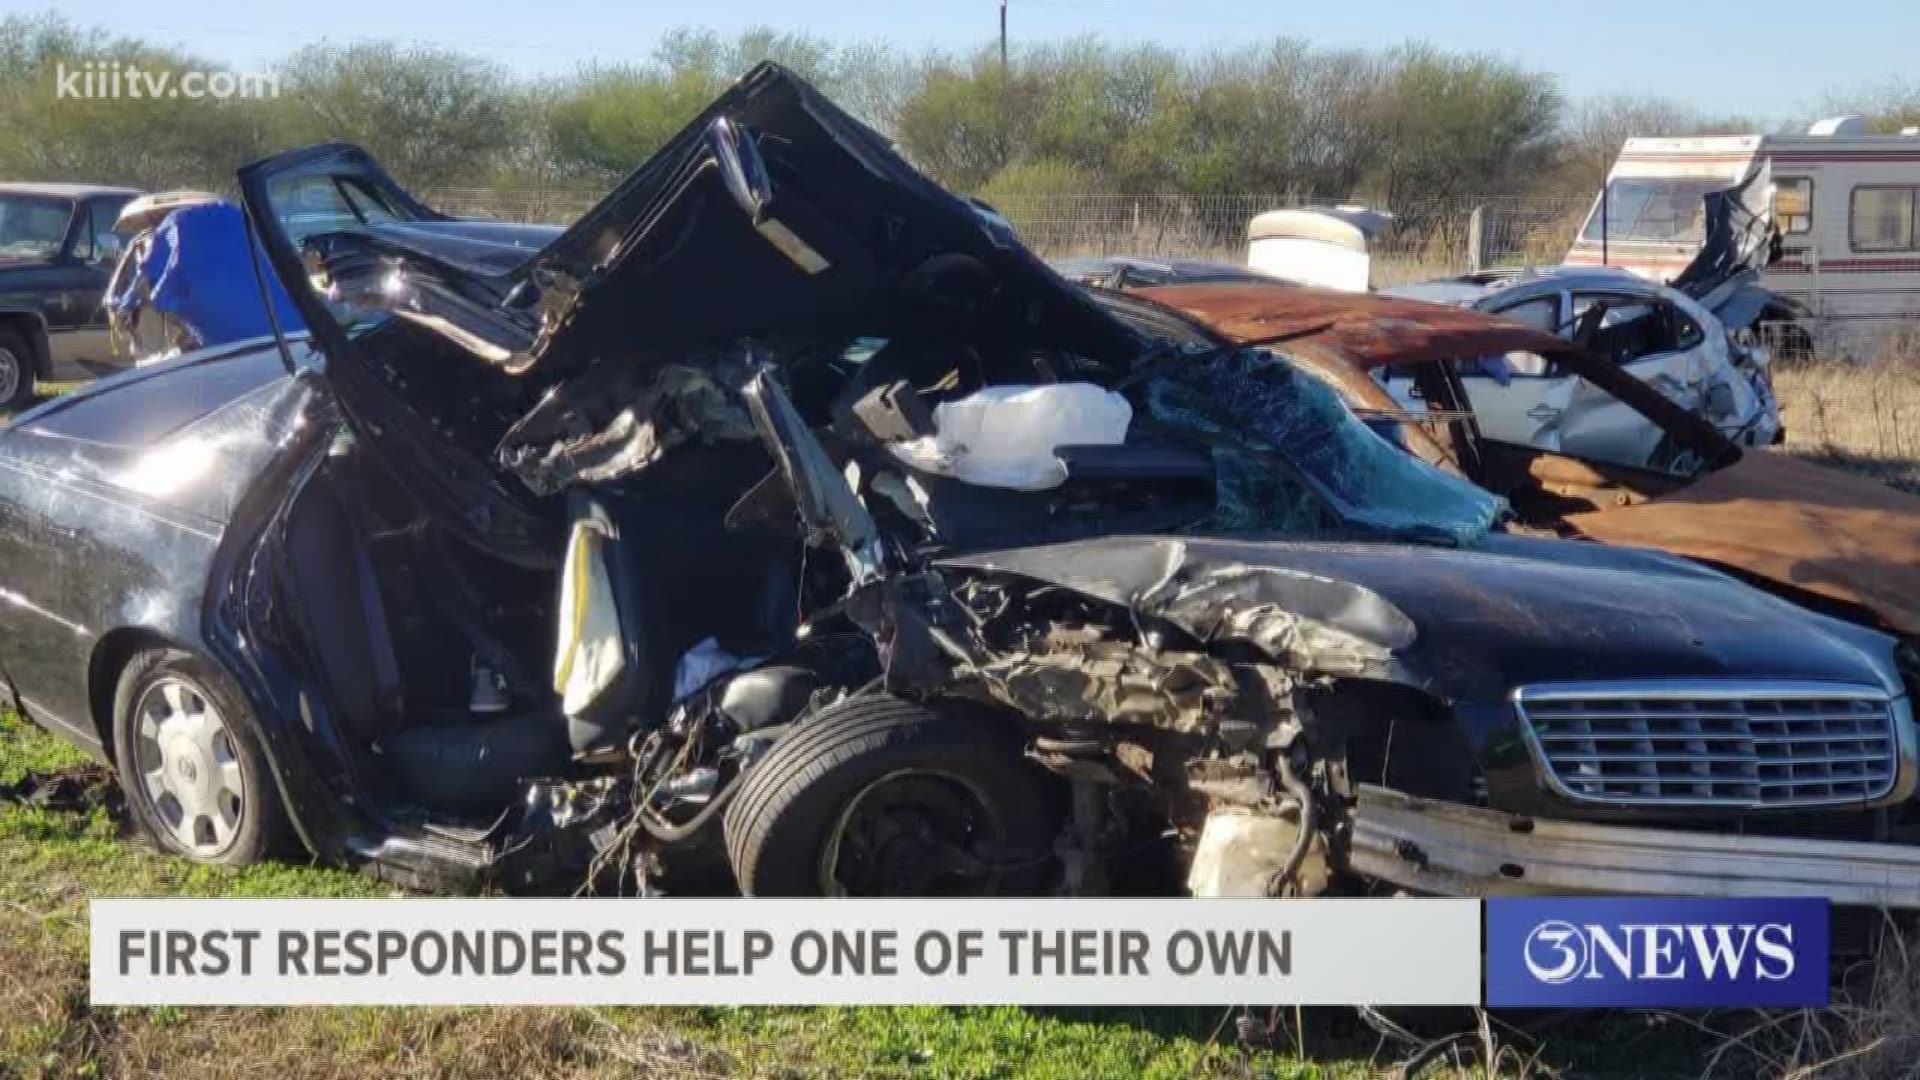 In January, a Beeville family was nearly killed in an accident coming home from the holidays.